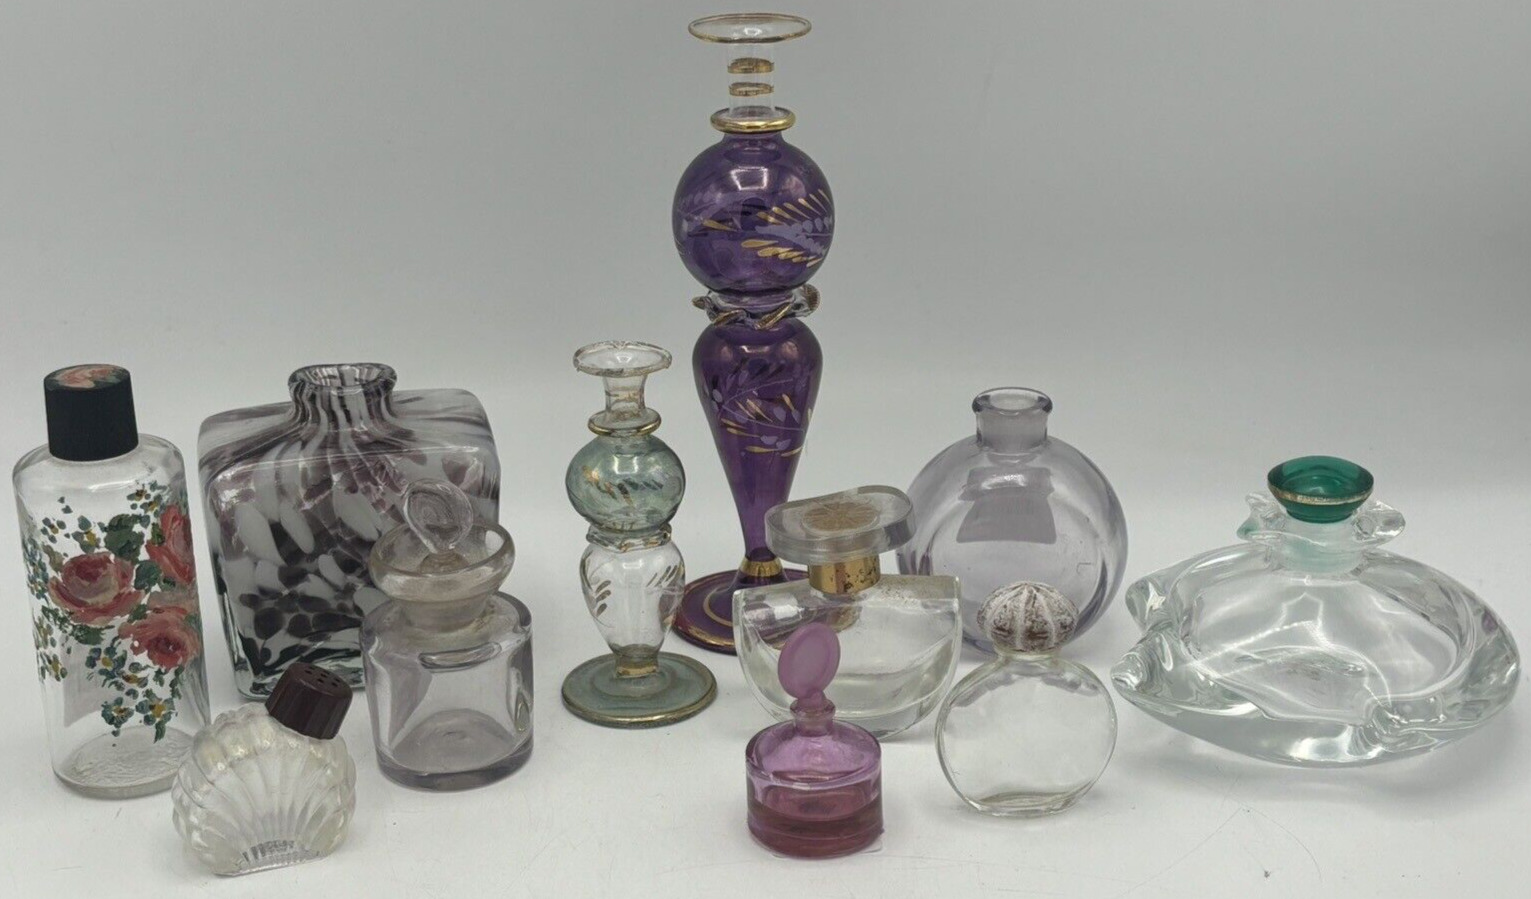 Perfume Glass Bottle Lot of 11 Empty Decorative Vanity Collection